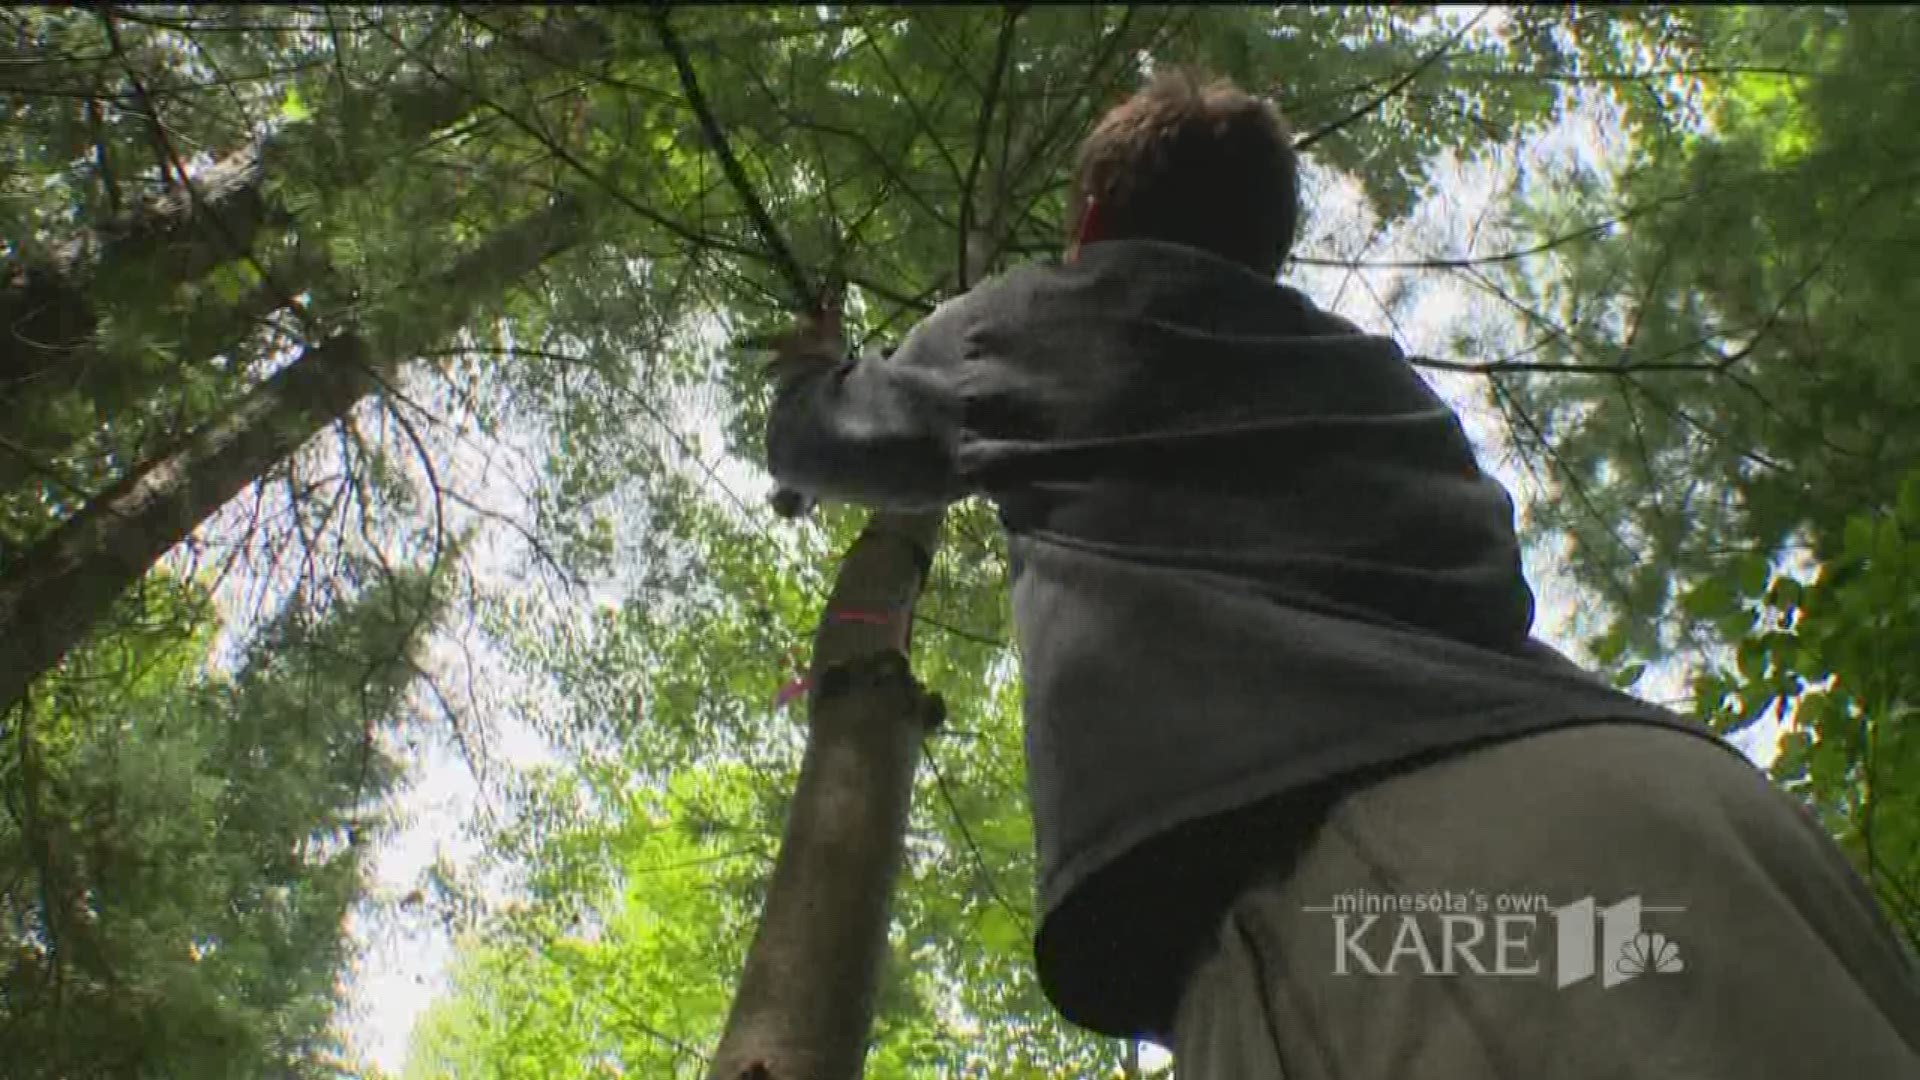 If you listened closely to the woods north of Grand Rapids this summer, you could hear modern-day lumberjacks trimming white pines; if you captured a glimpse through the thick growth, you might be surprised to learn they were all teenagers. http://kare11.